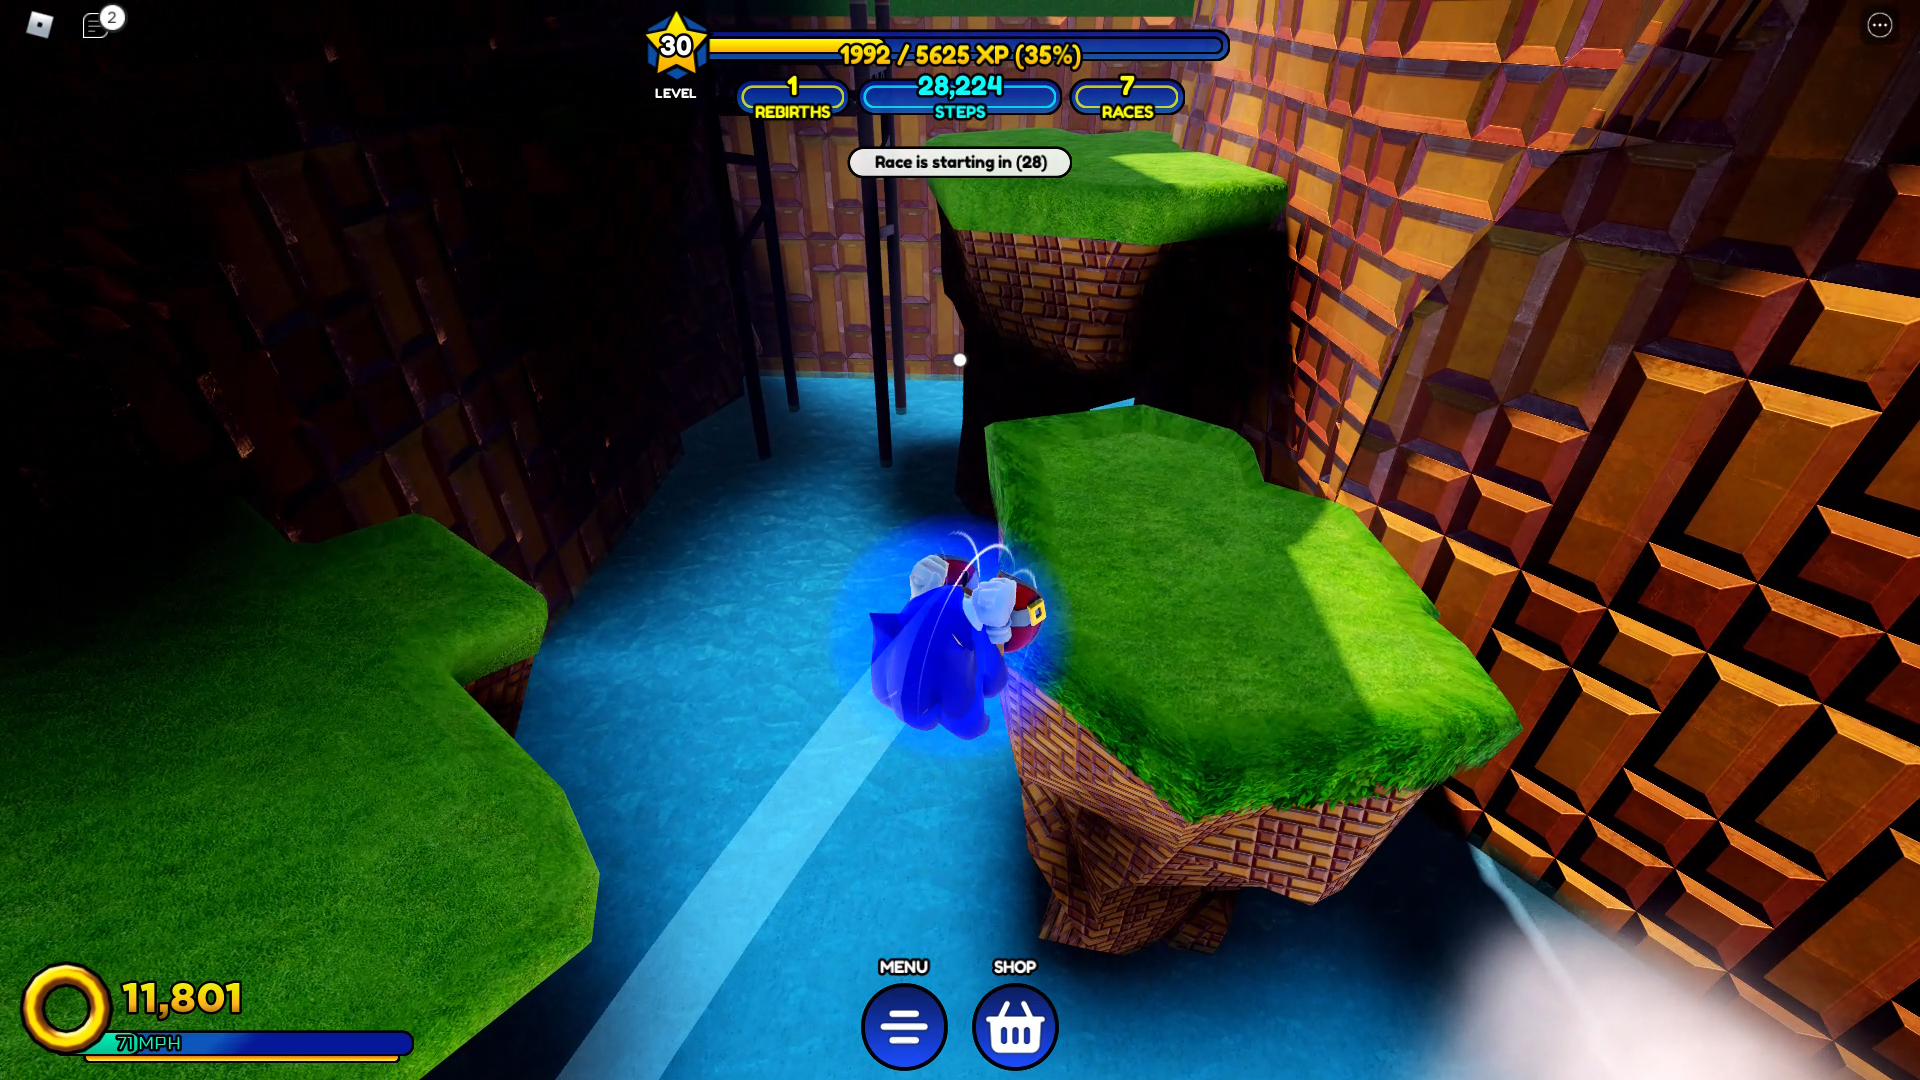 Sonic Speed Simulator review - Sonic doing a spinning jump between two grassy platforms in a somewhat shadowy canyon.